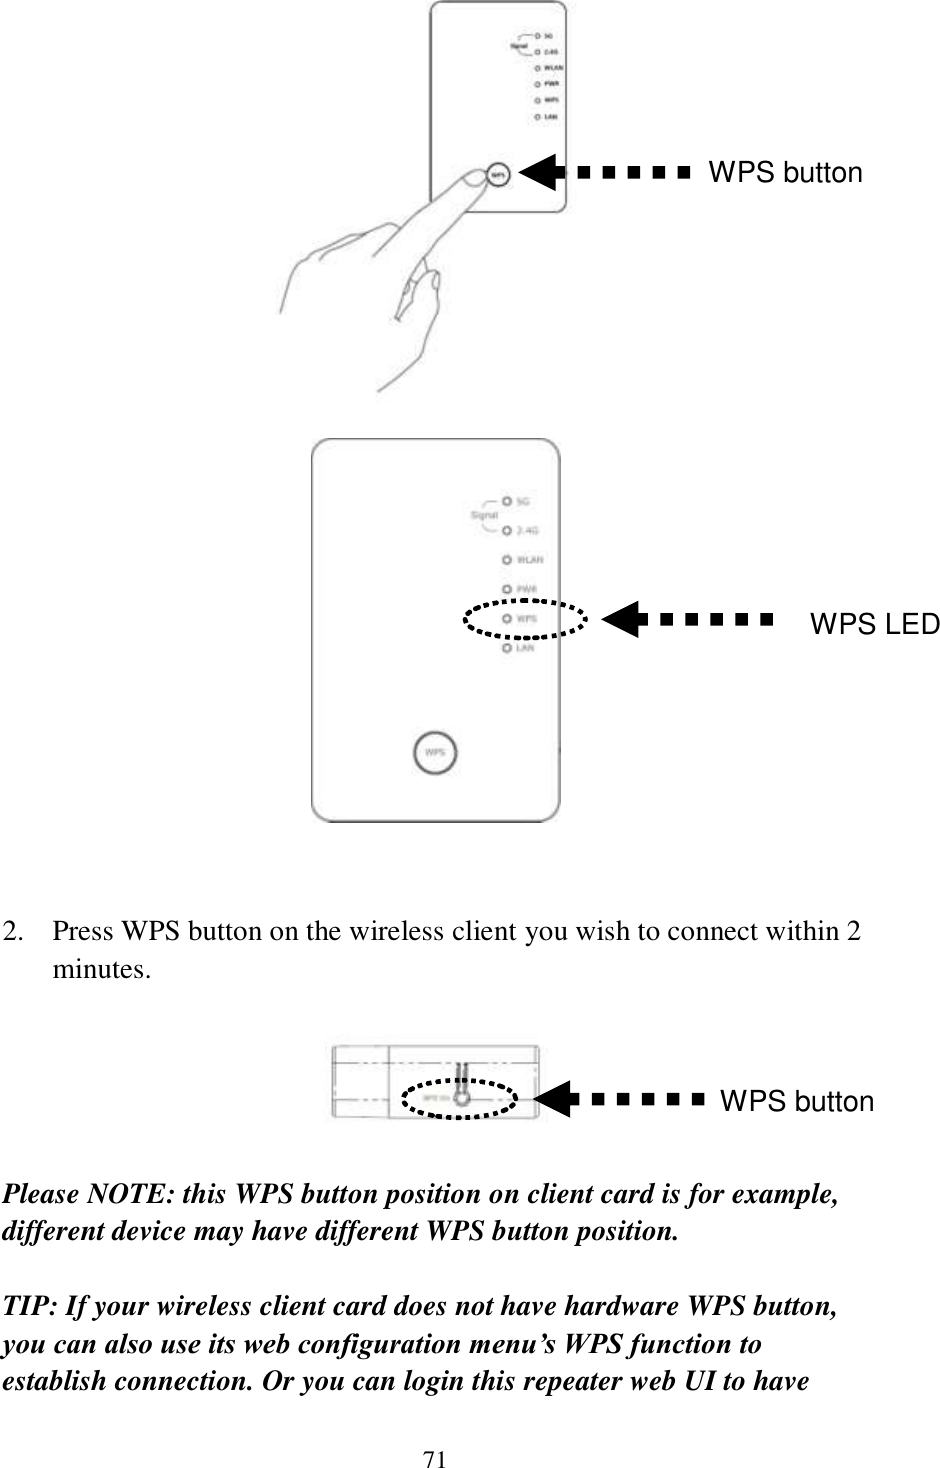 71     2. Press WPS button on the wireless client you wish to connect within 2 minutes.    Please NOTE: this WPS button position on client card is for example, different device may have different WPS button position.  TIP: If your wireless client card does not have hardware WPS button, you can also use its web configuration menu’s WPS function to establish connection. Or you can login this repeater web UI to have WPS button WPS LED WPS button 